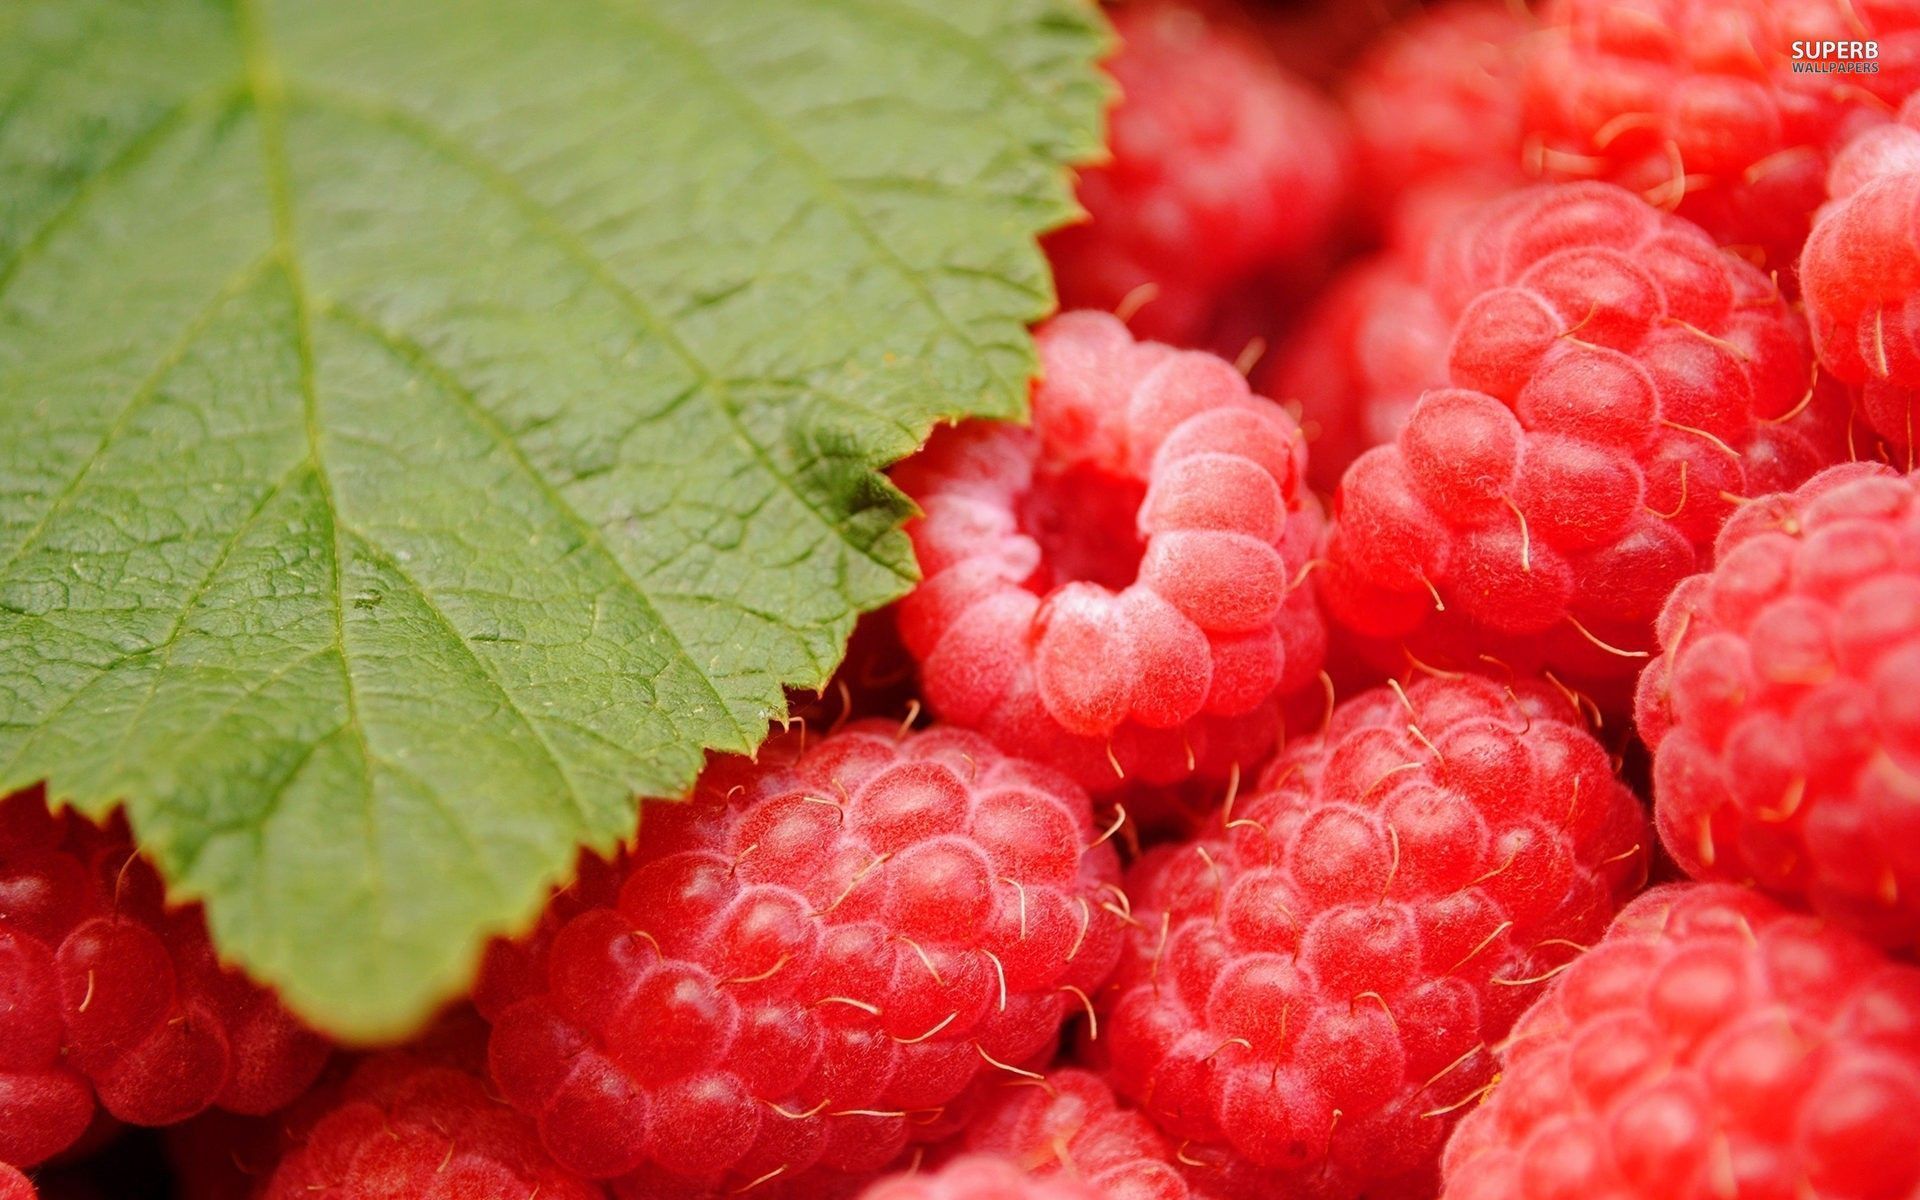 Raspberry wallpaper - Photography wallpapers - #20973